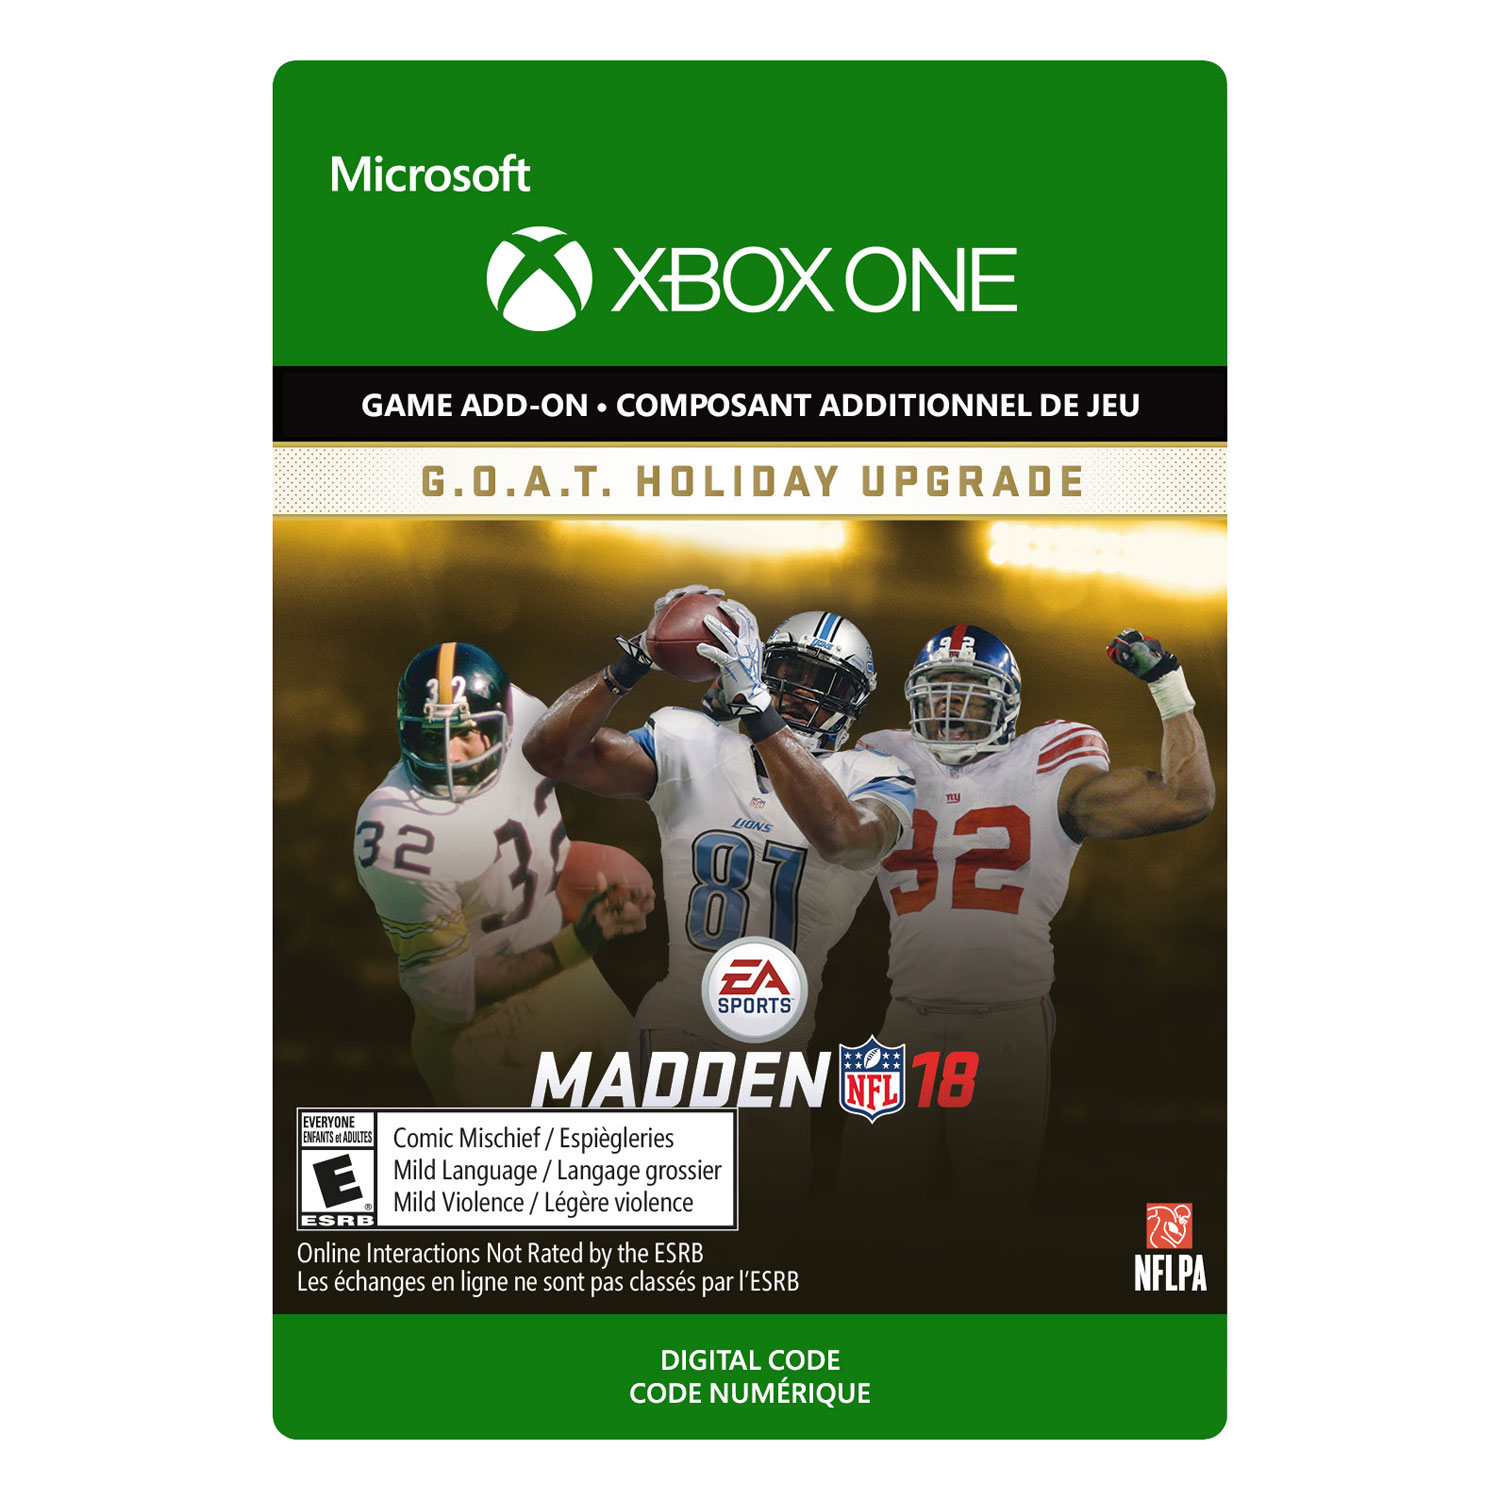 Madden NFL 18 G.O.A.T Holiday Upgrade Expansion Pack (Xbox One) - Digital Download